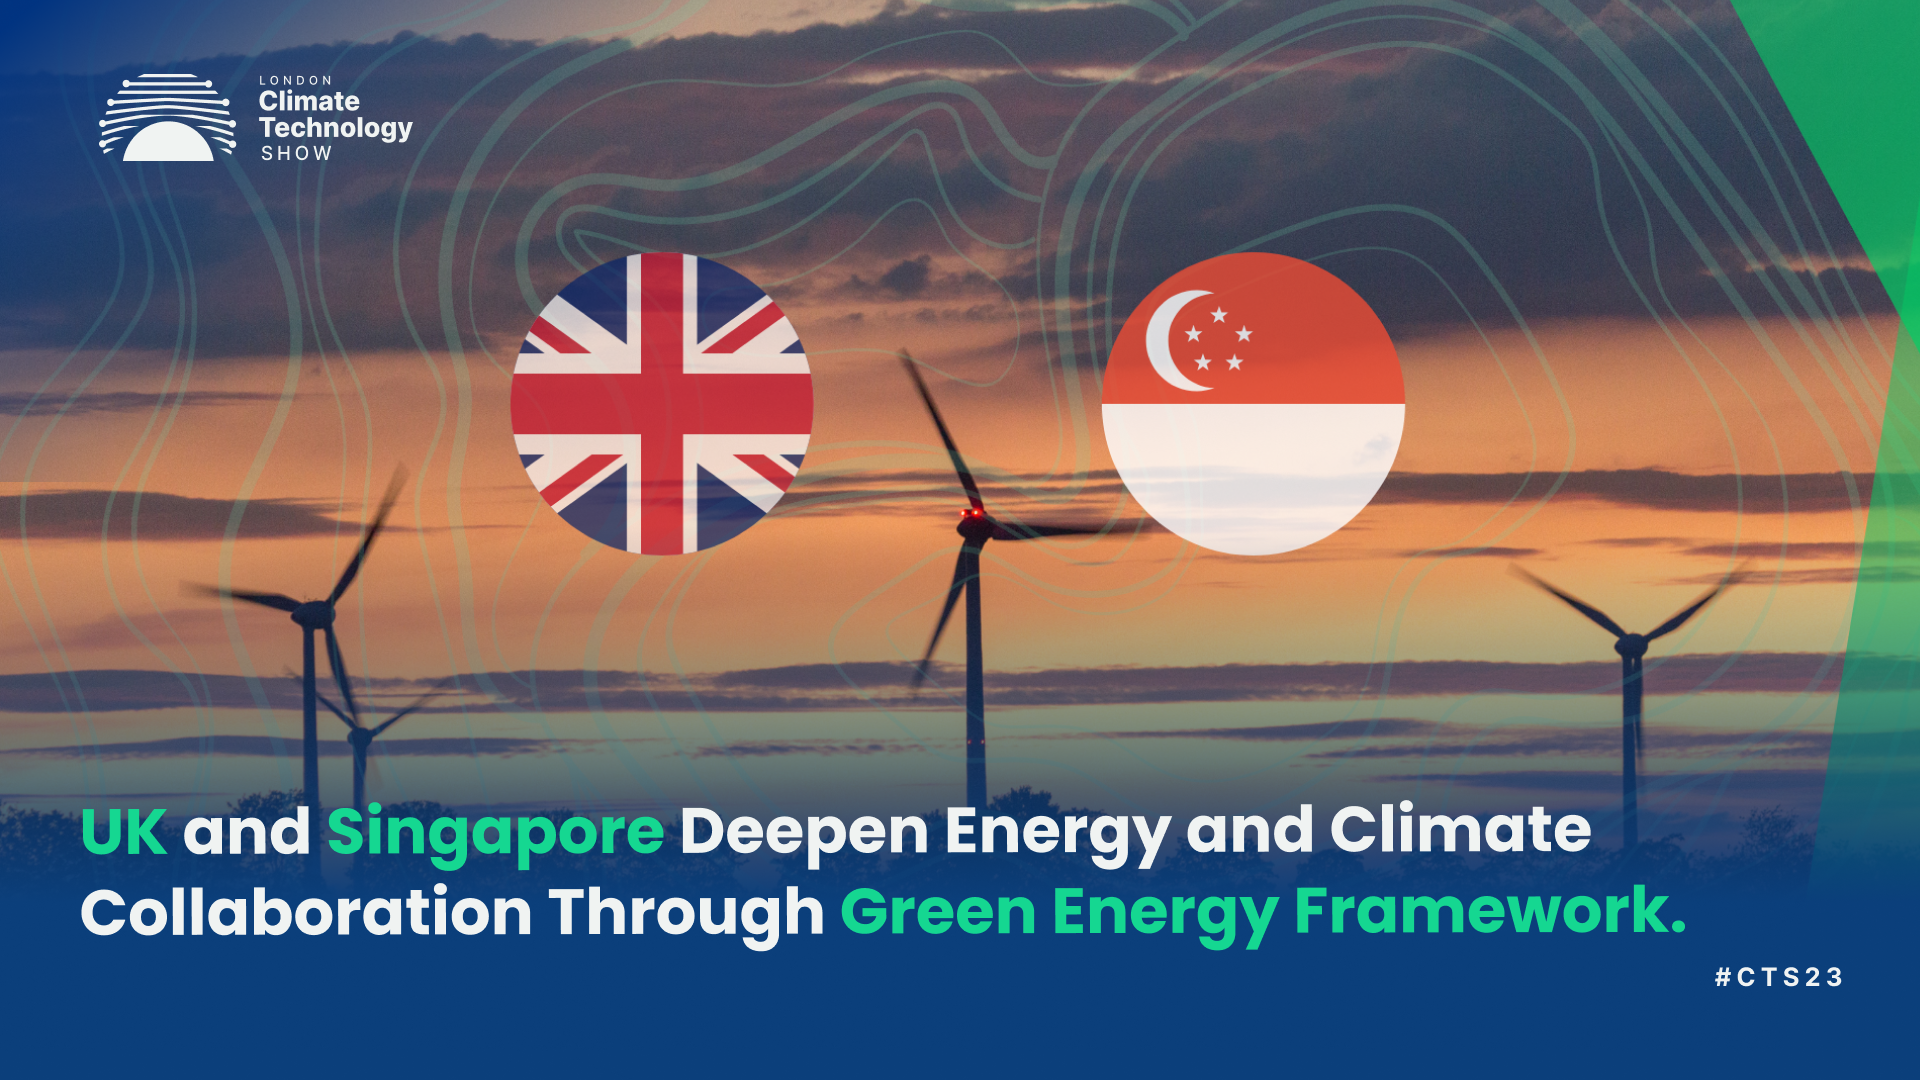 UK and Singapore Deepen Energy and Climate Collaboration Through Green Energy Framework